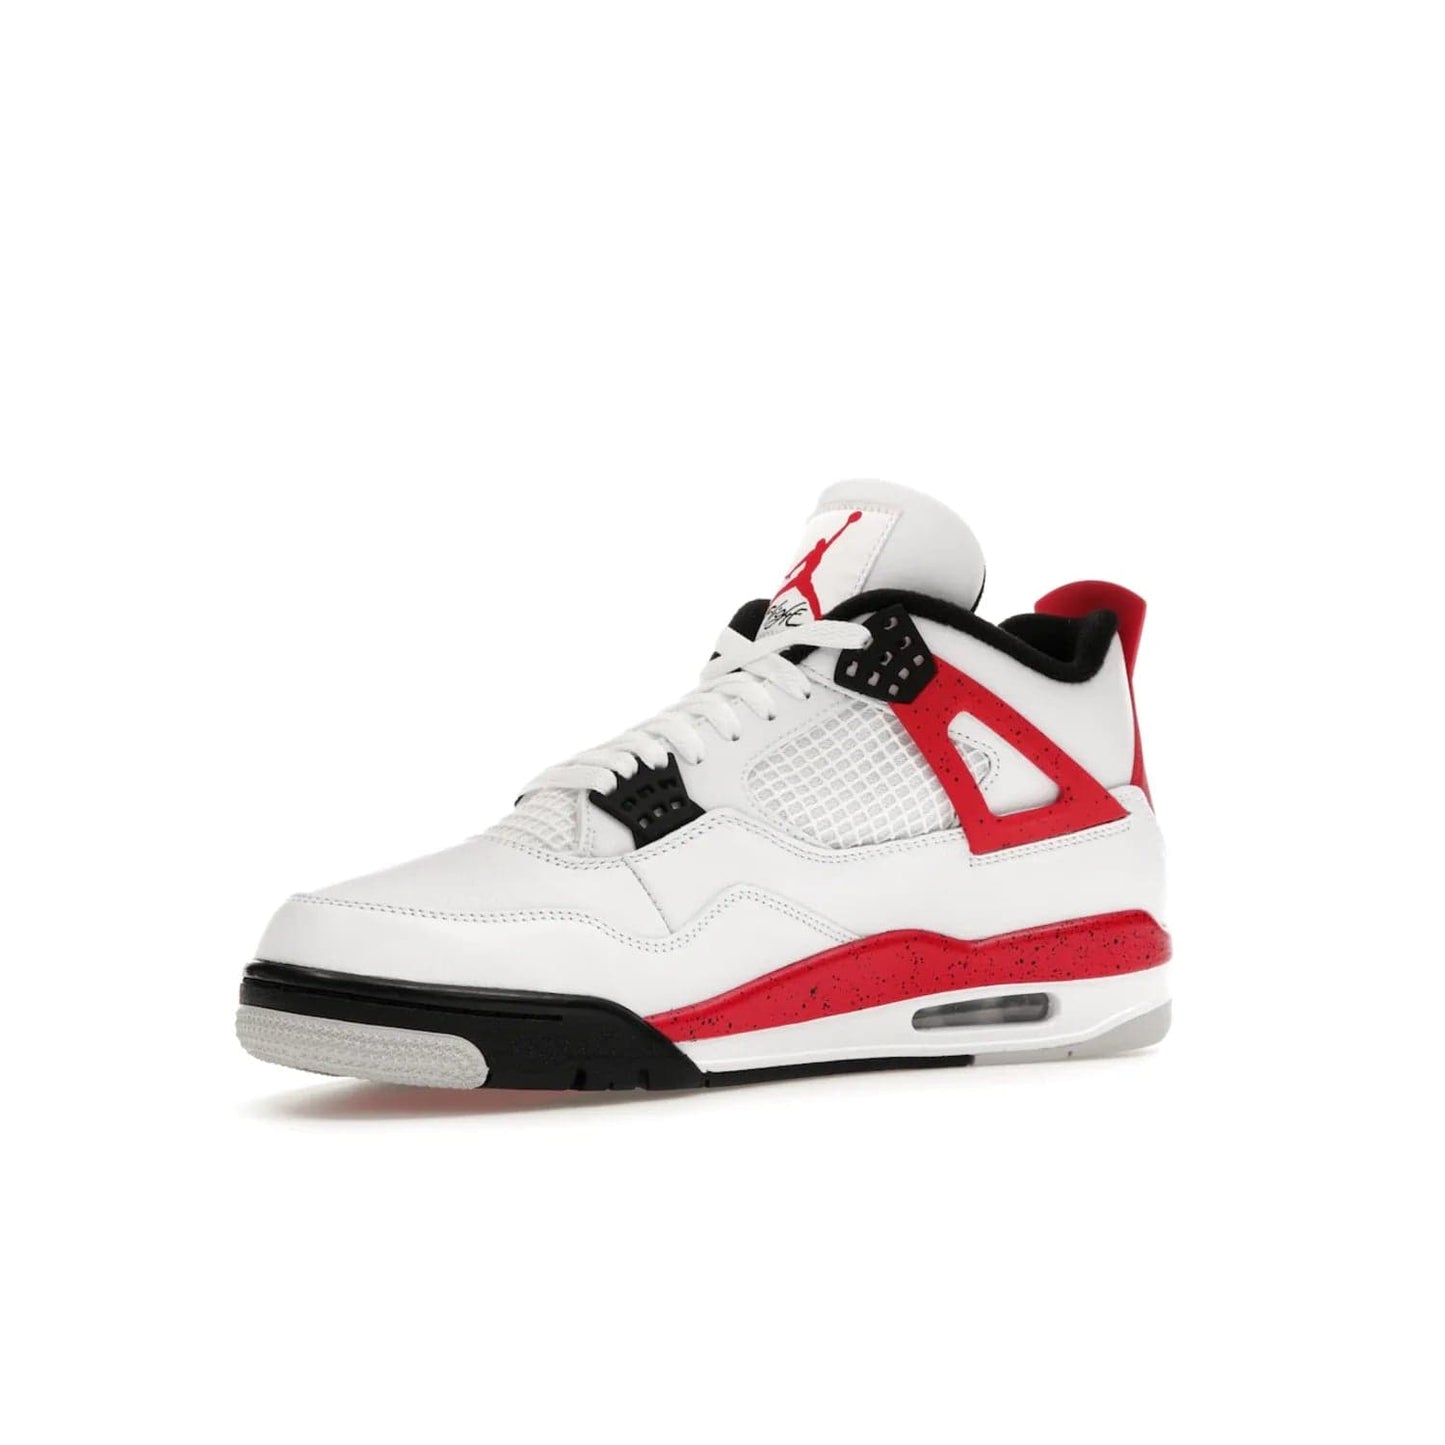 Jordan 4 Retro Red Cement - Image 16 - Only at www.BallersClubKickz.com - Iconic Jordan silhouette with a unique twist. White premium leather uppers with fire red and black detailing. Black, white, and fire red midsole with mesh detailing and Jumpman logo. Jordan 4 Retro Red Cement released with premium price.